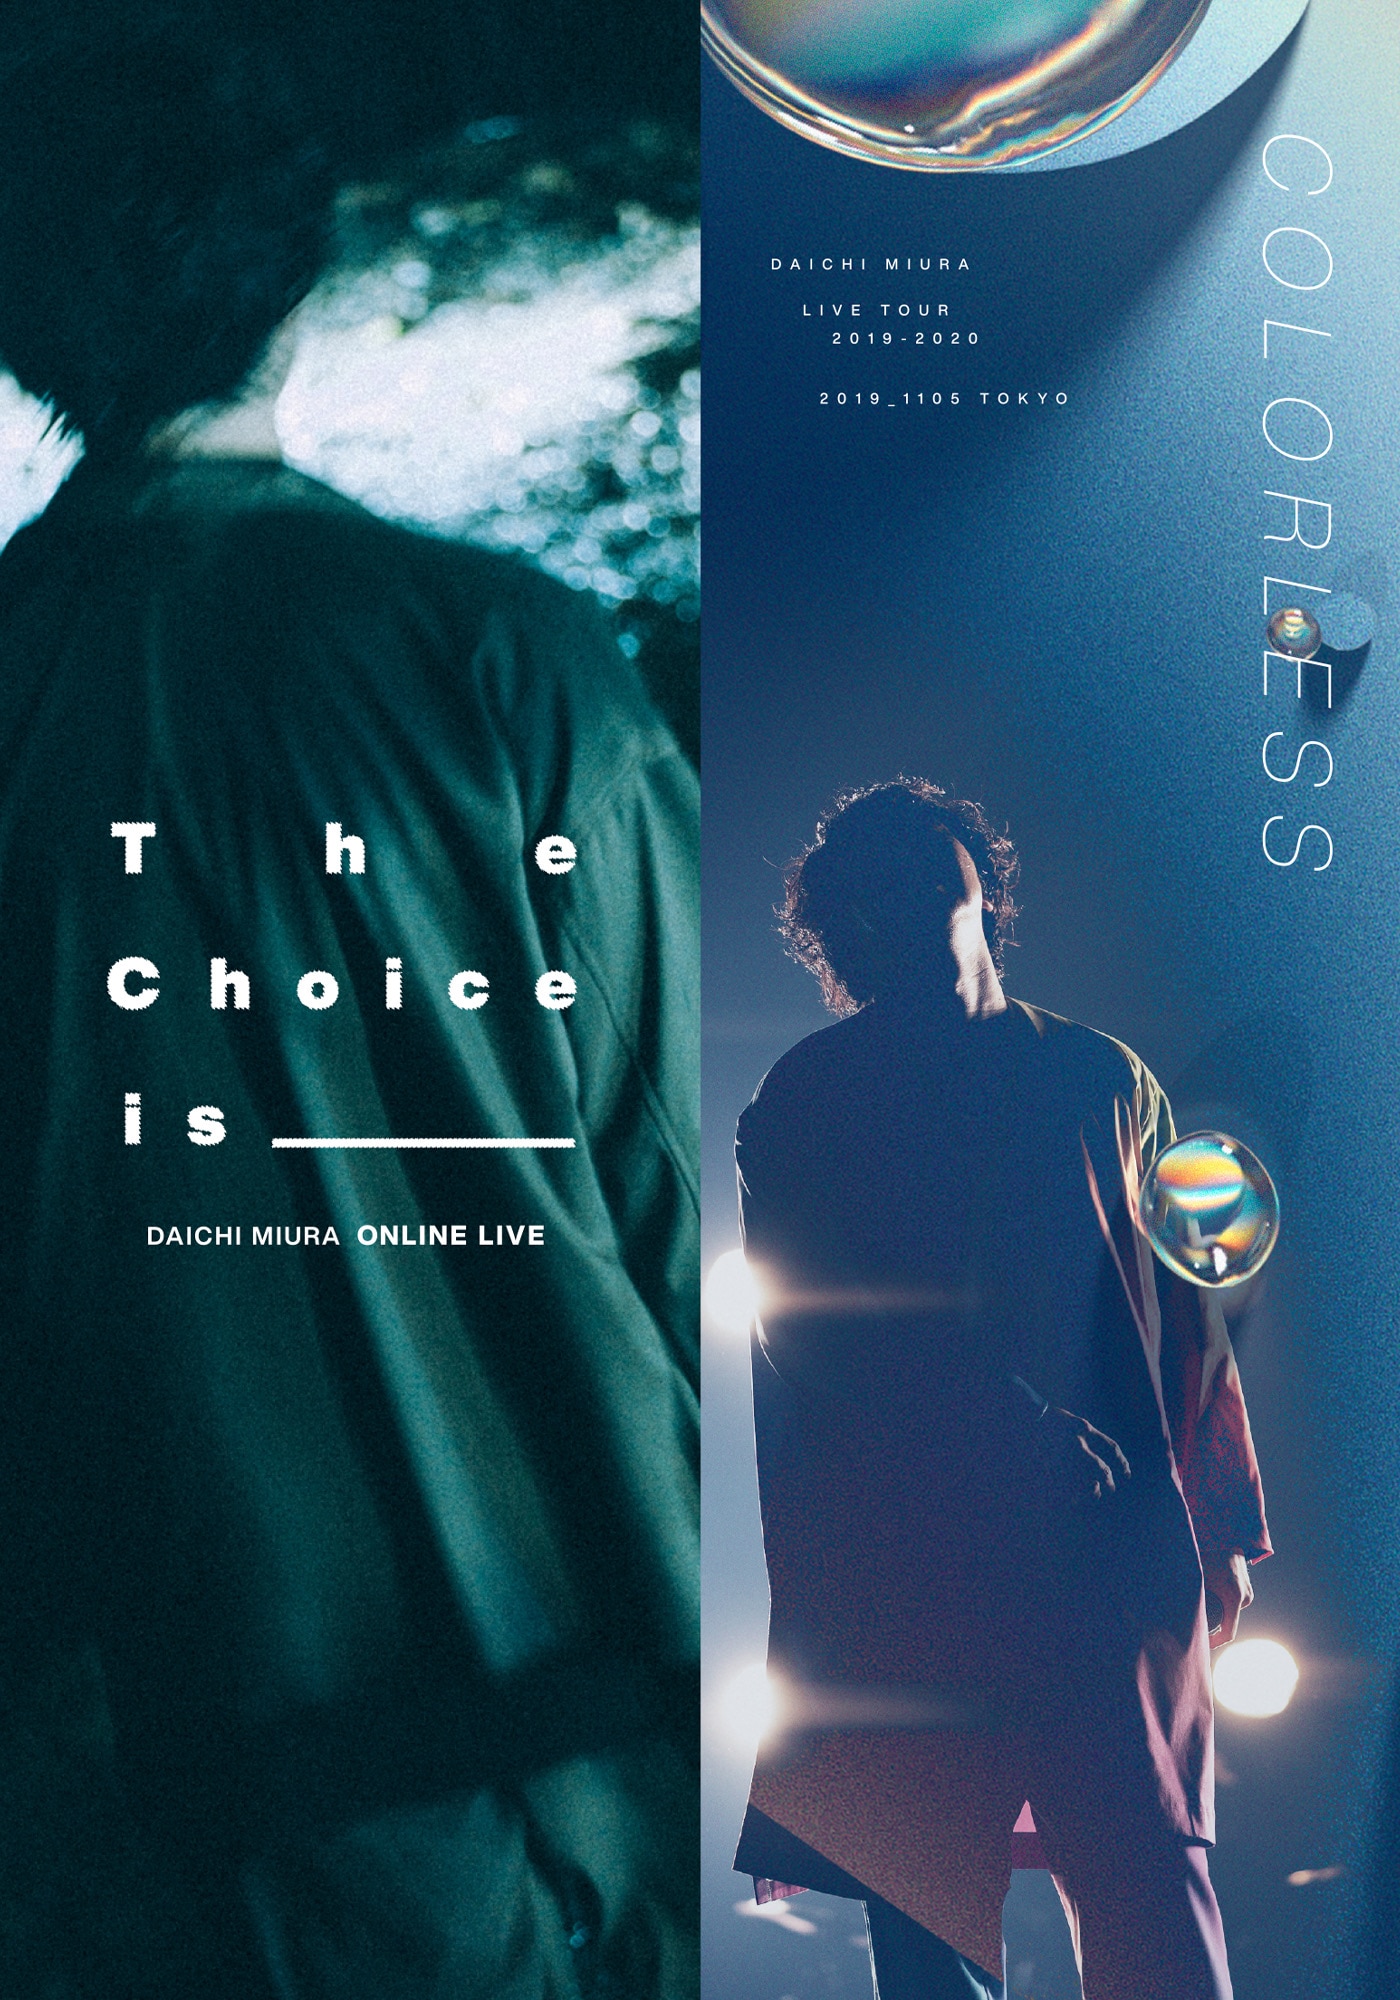 DAICHI MIURA LIVE COLORLESS / The Choice is _____ DISCOGRAPHY 